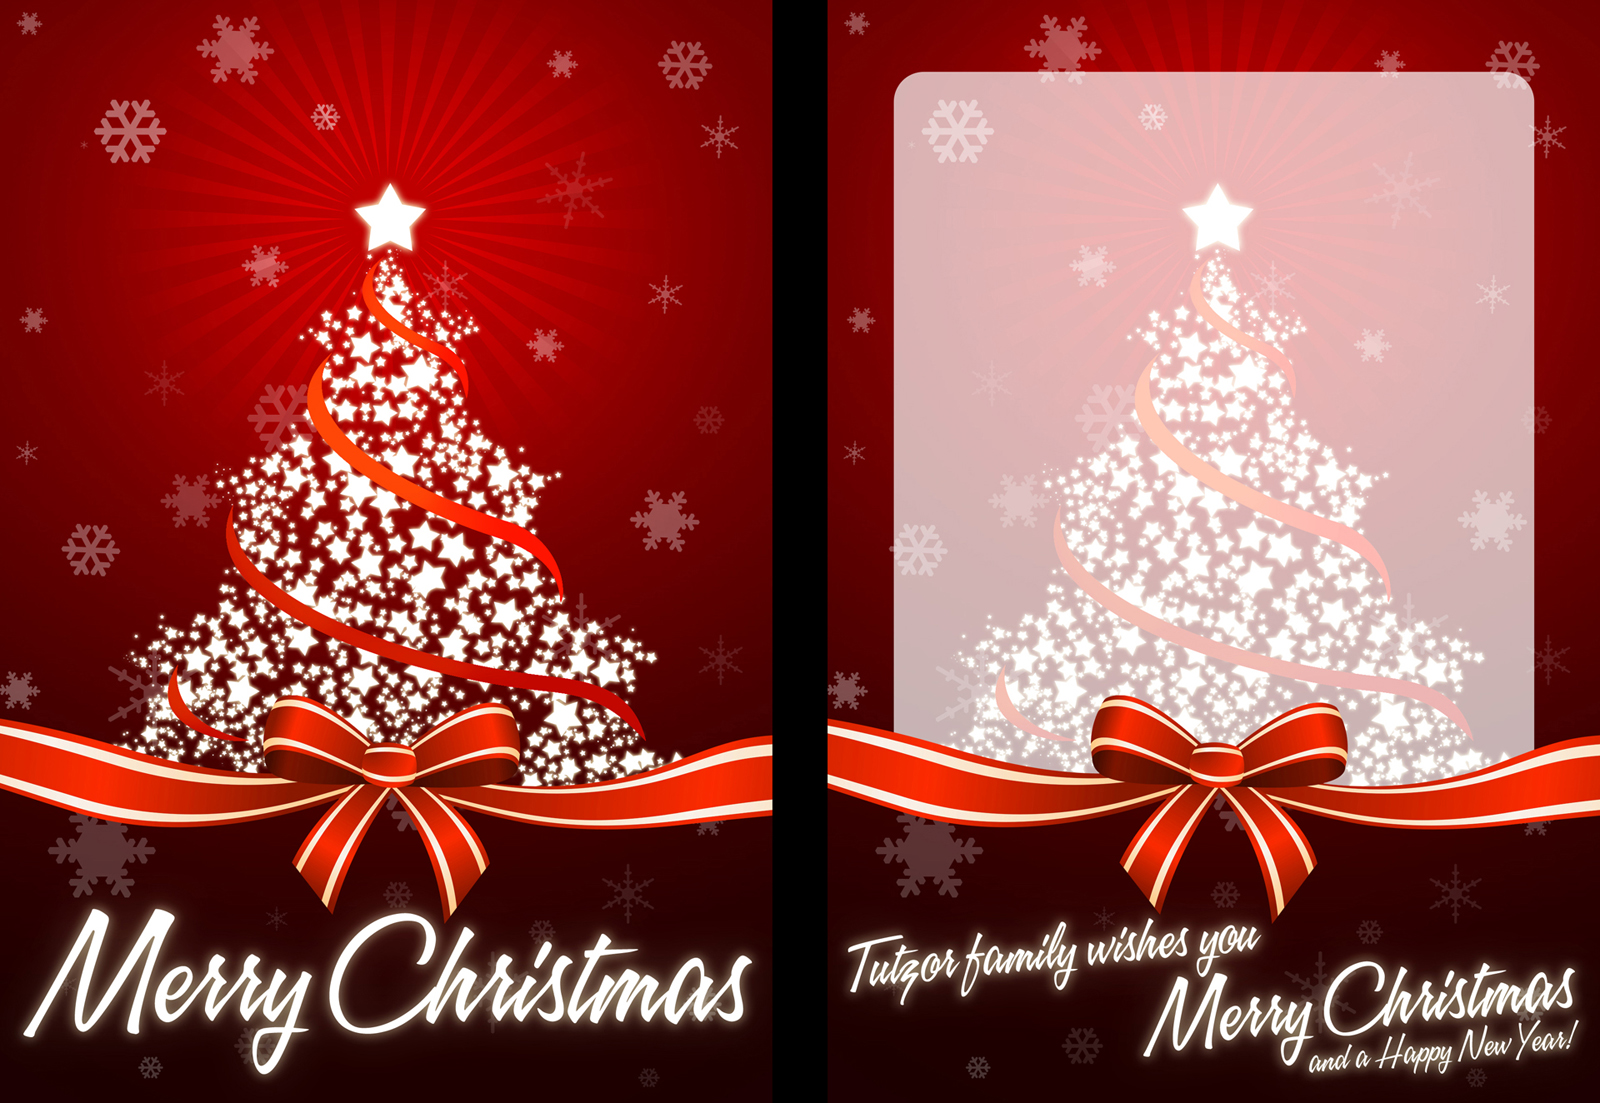 How To Create Your Own Christmas Card Ready For Print Tutzor